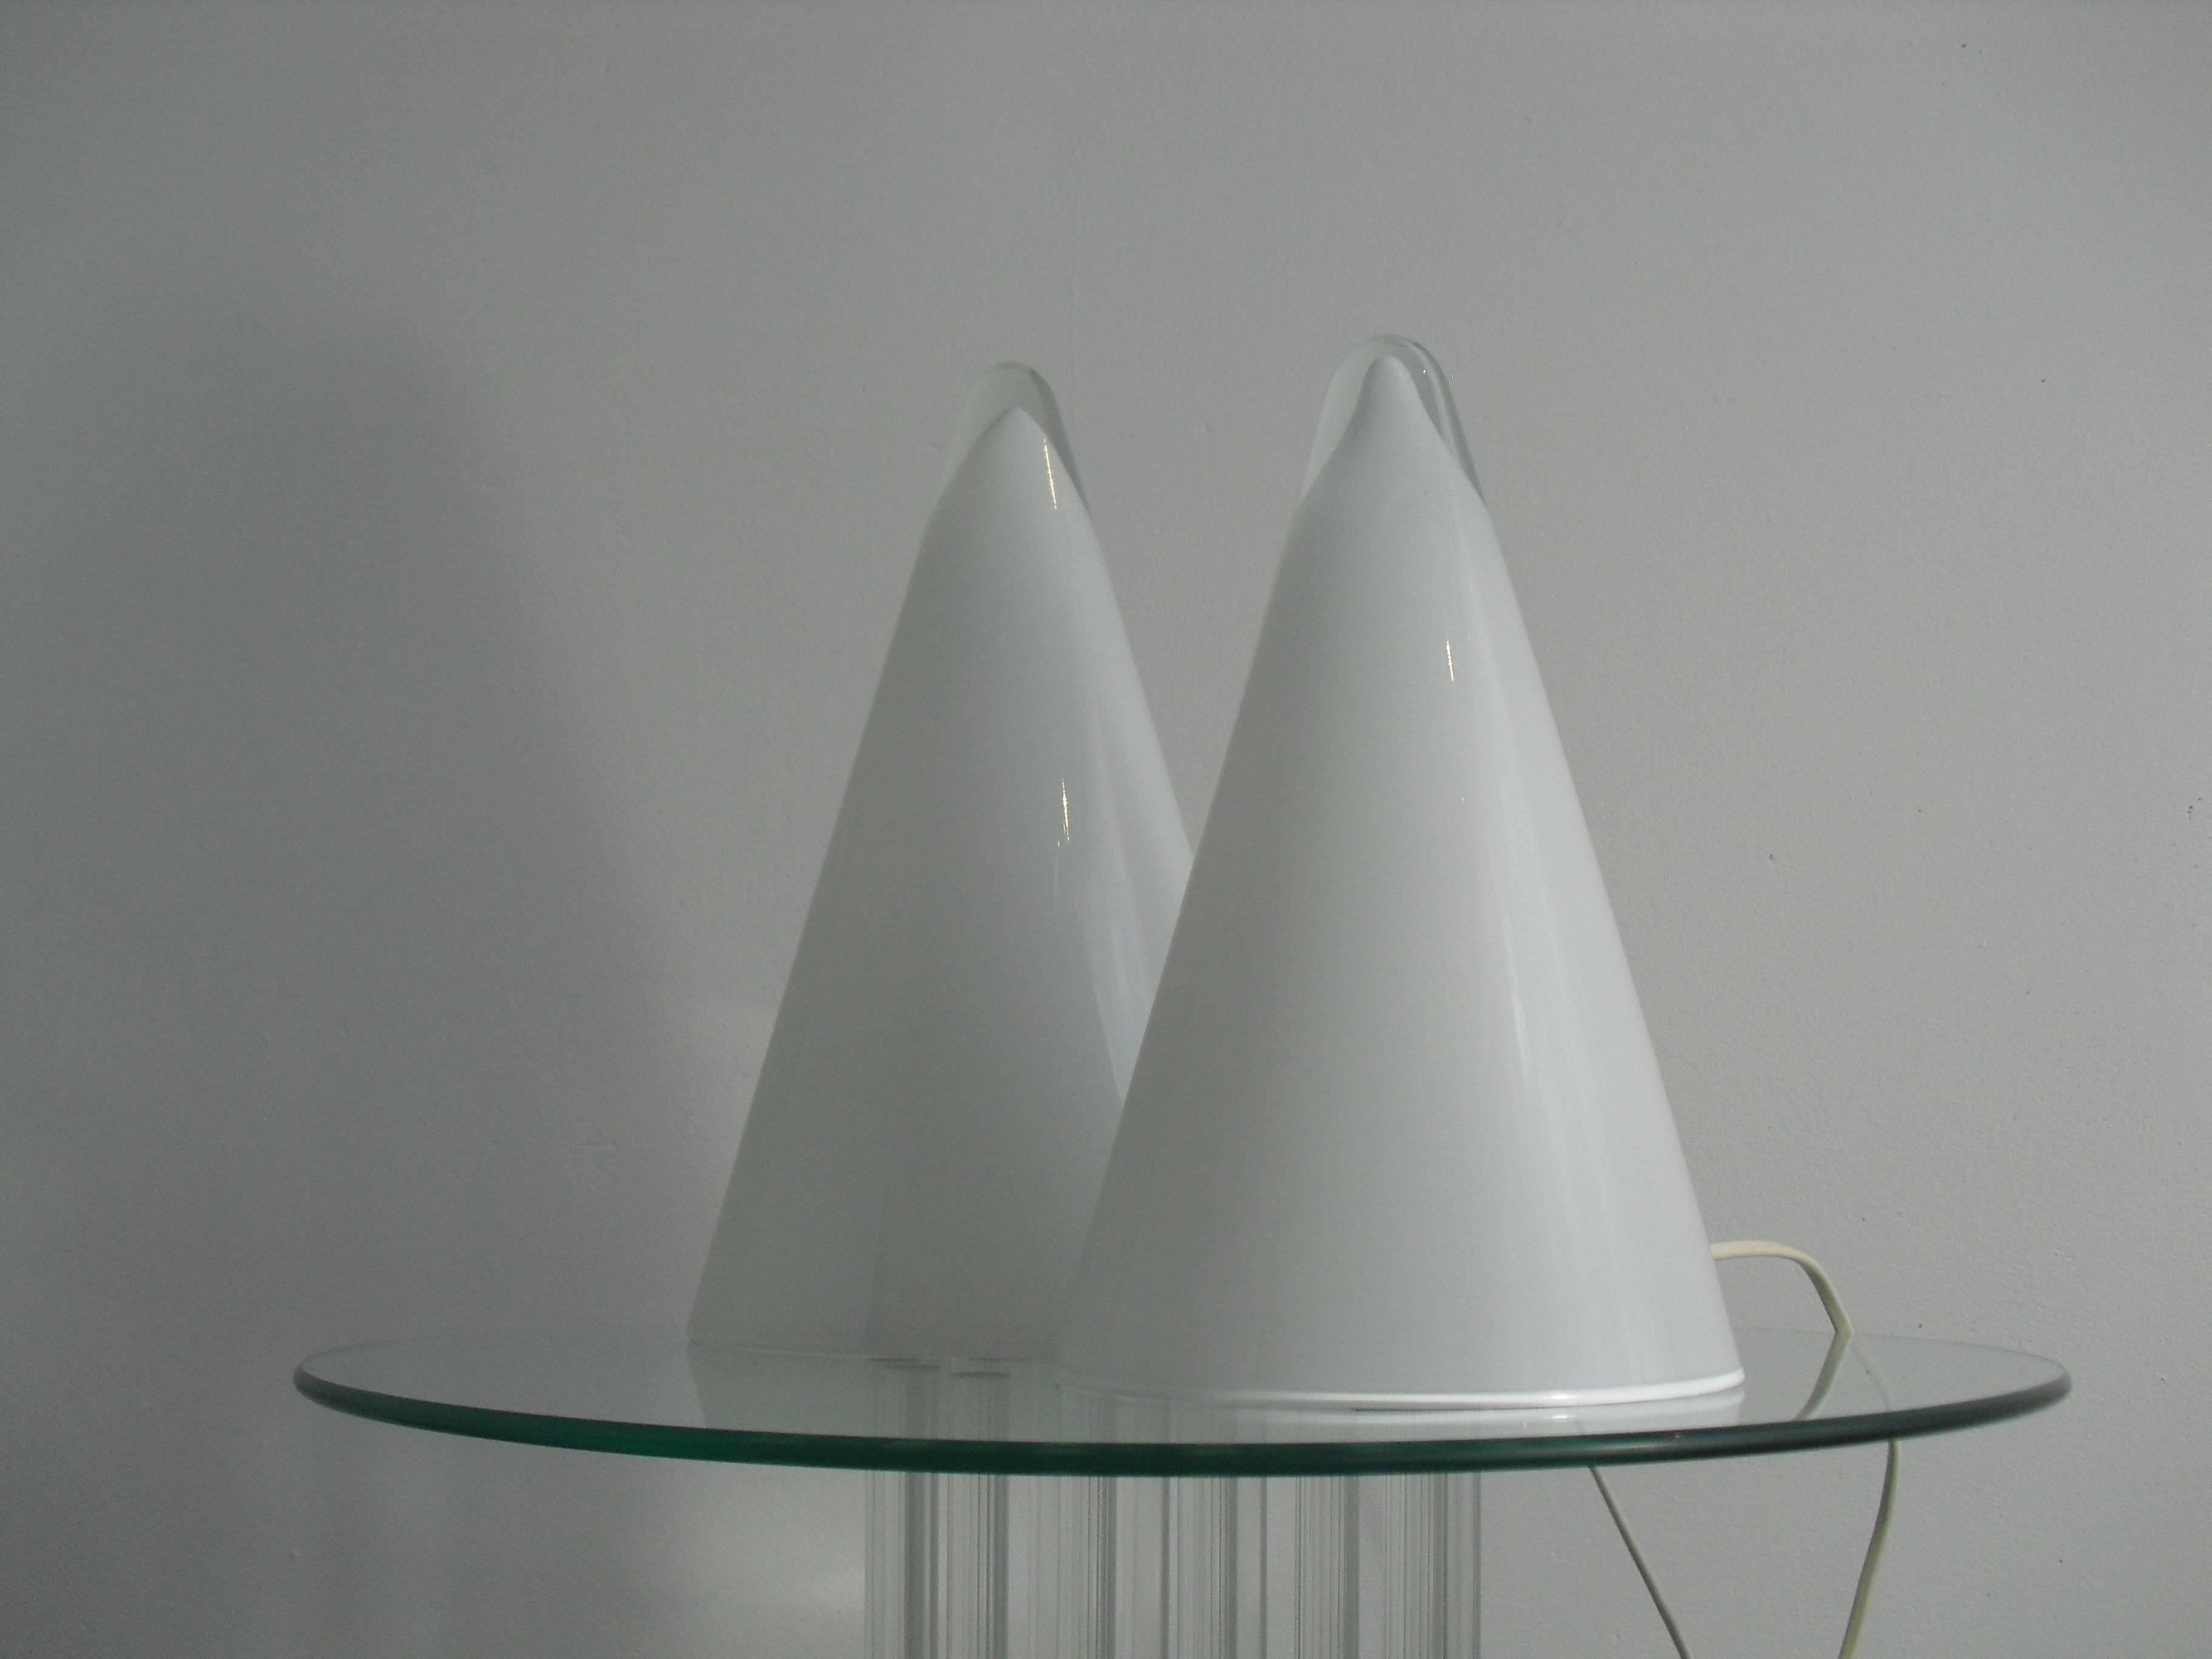 This pair of opal glass 'Iceberg' table lamps were made in France by SCE France during the 1980s.
The translucent top makes it look like ice.

Dimensions: H 32 & 26 cm x diameter 19 & 16 cm.
The bigger one has an European E27 socket, the smaller